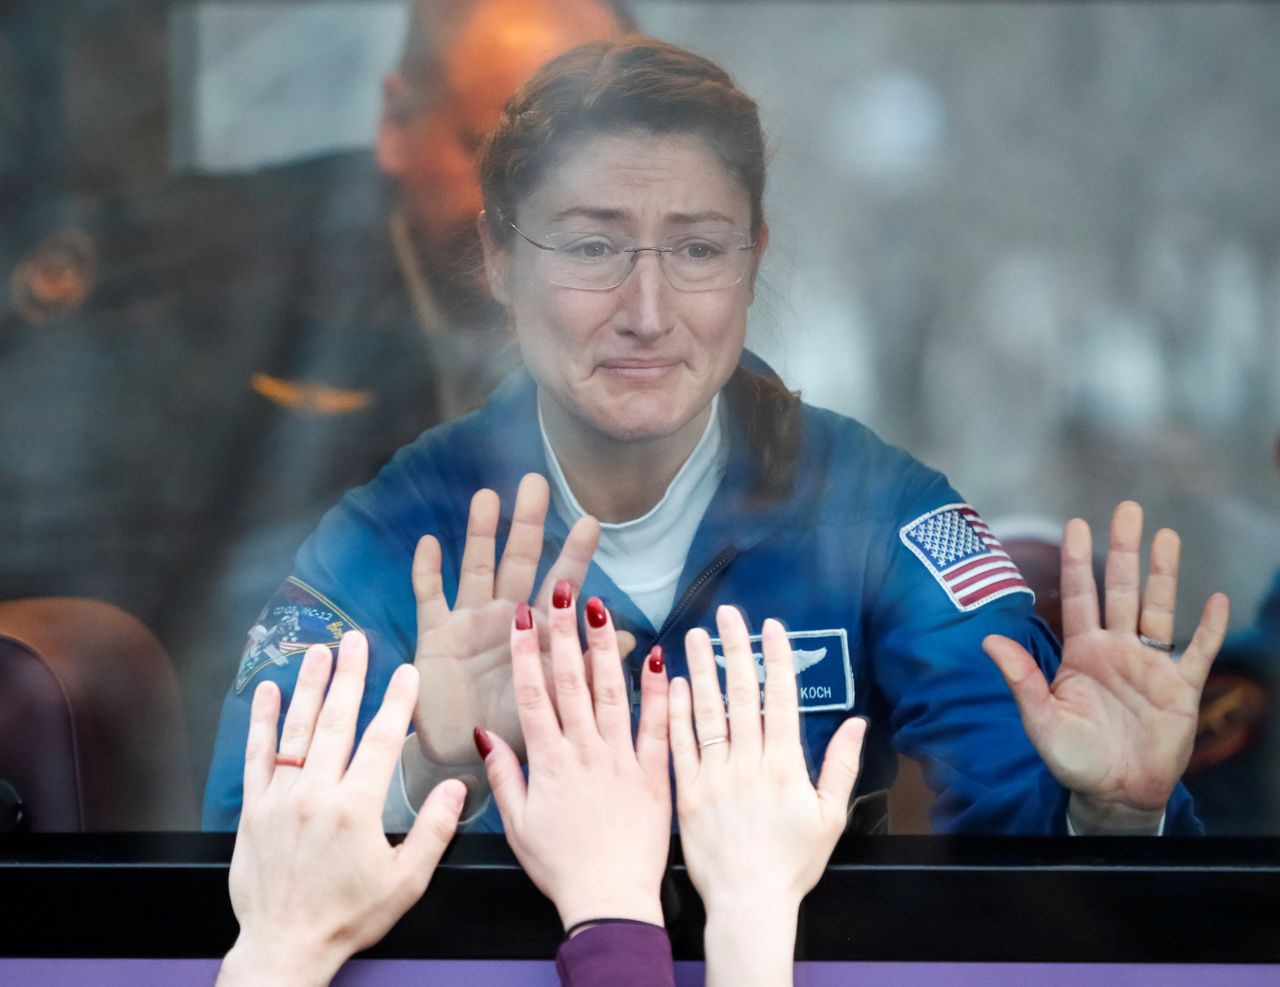 International Space Station crew member Christina Koch of the U.S. looks out a bus window before leaving for pre-flight preparation at the Baikonur Cosmodrome in Kazakhstan on March 14, 2019.